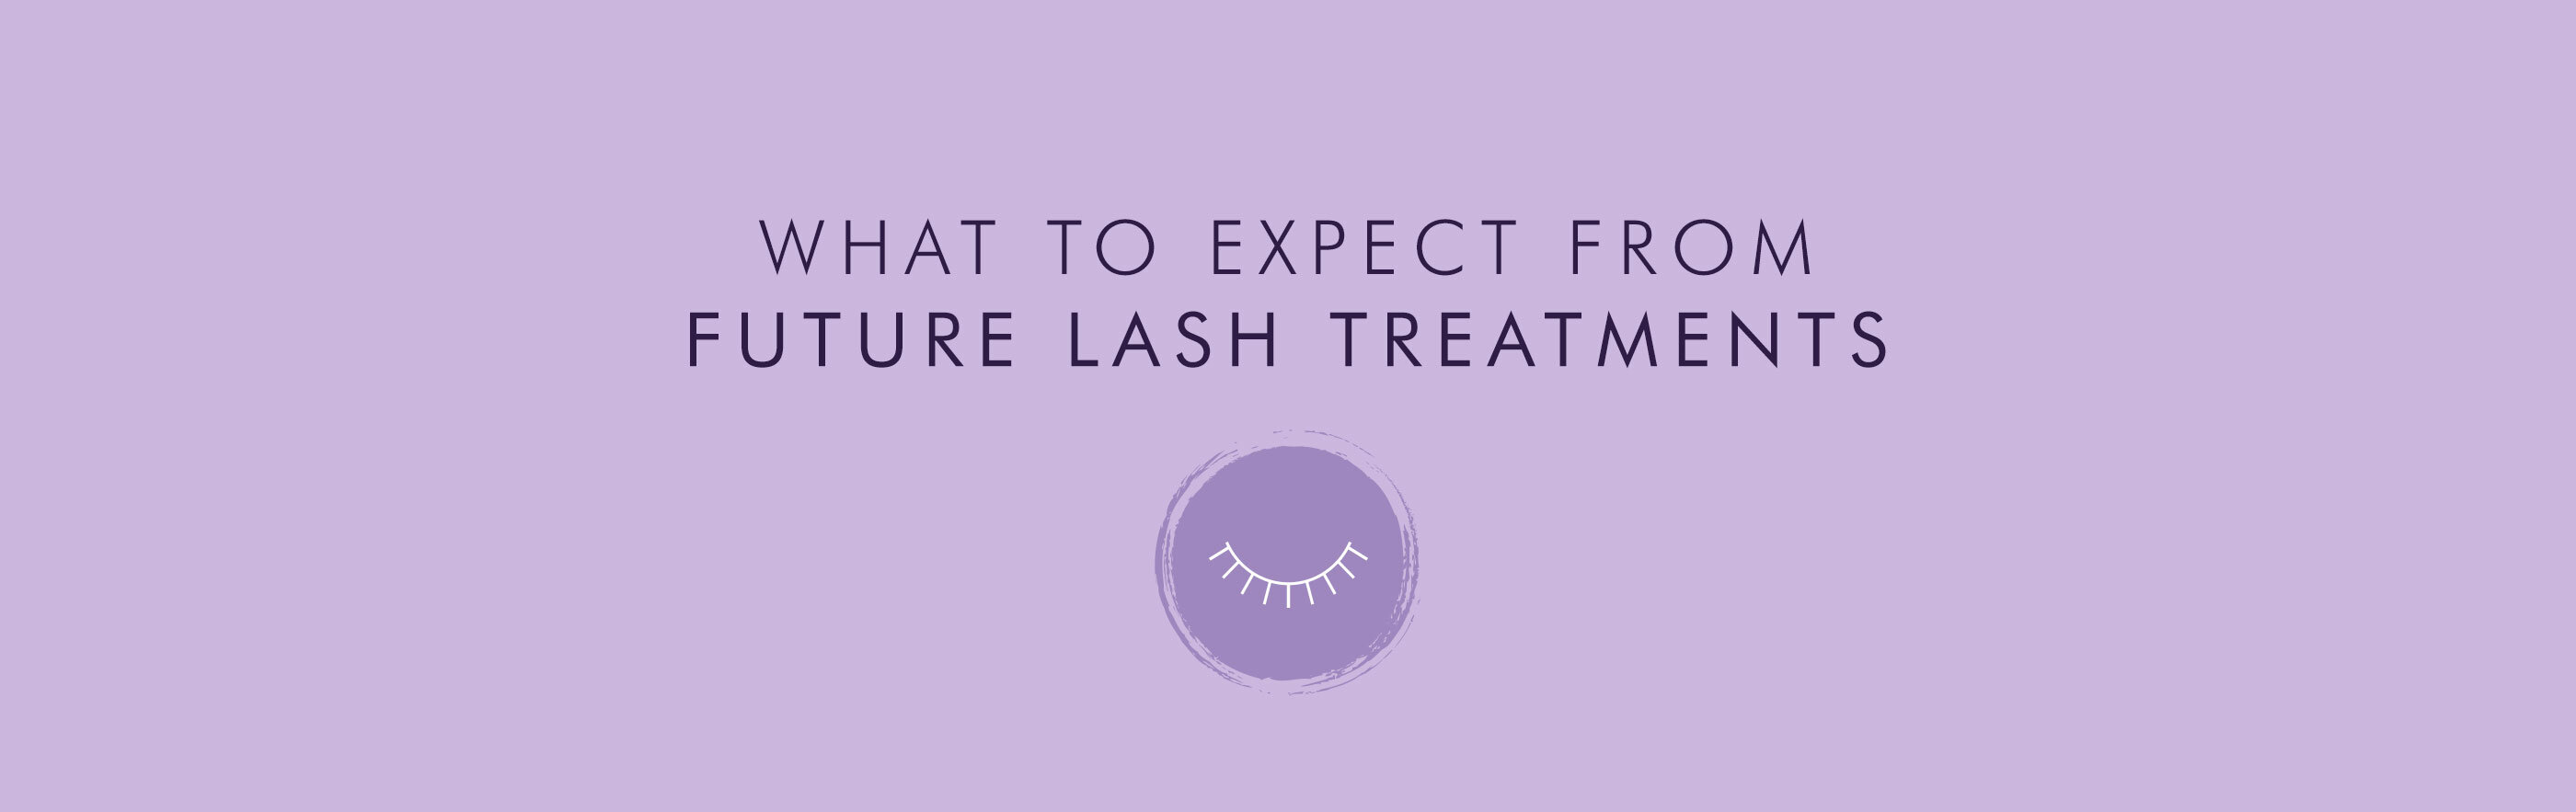 What To Expect From Future Lash Treatments